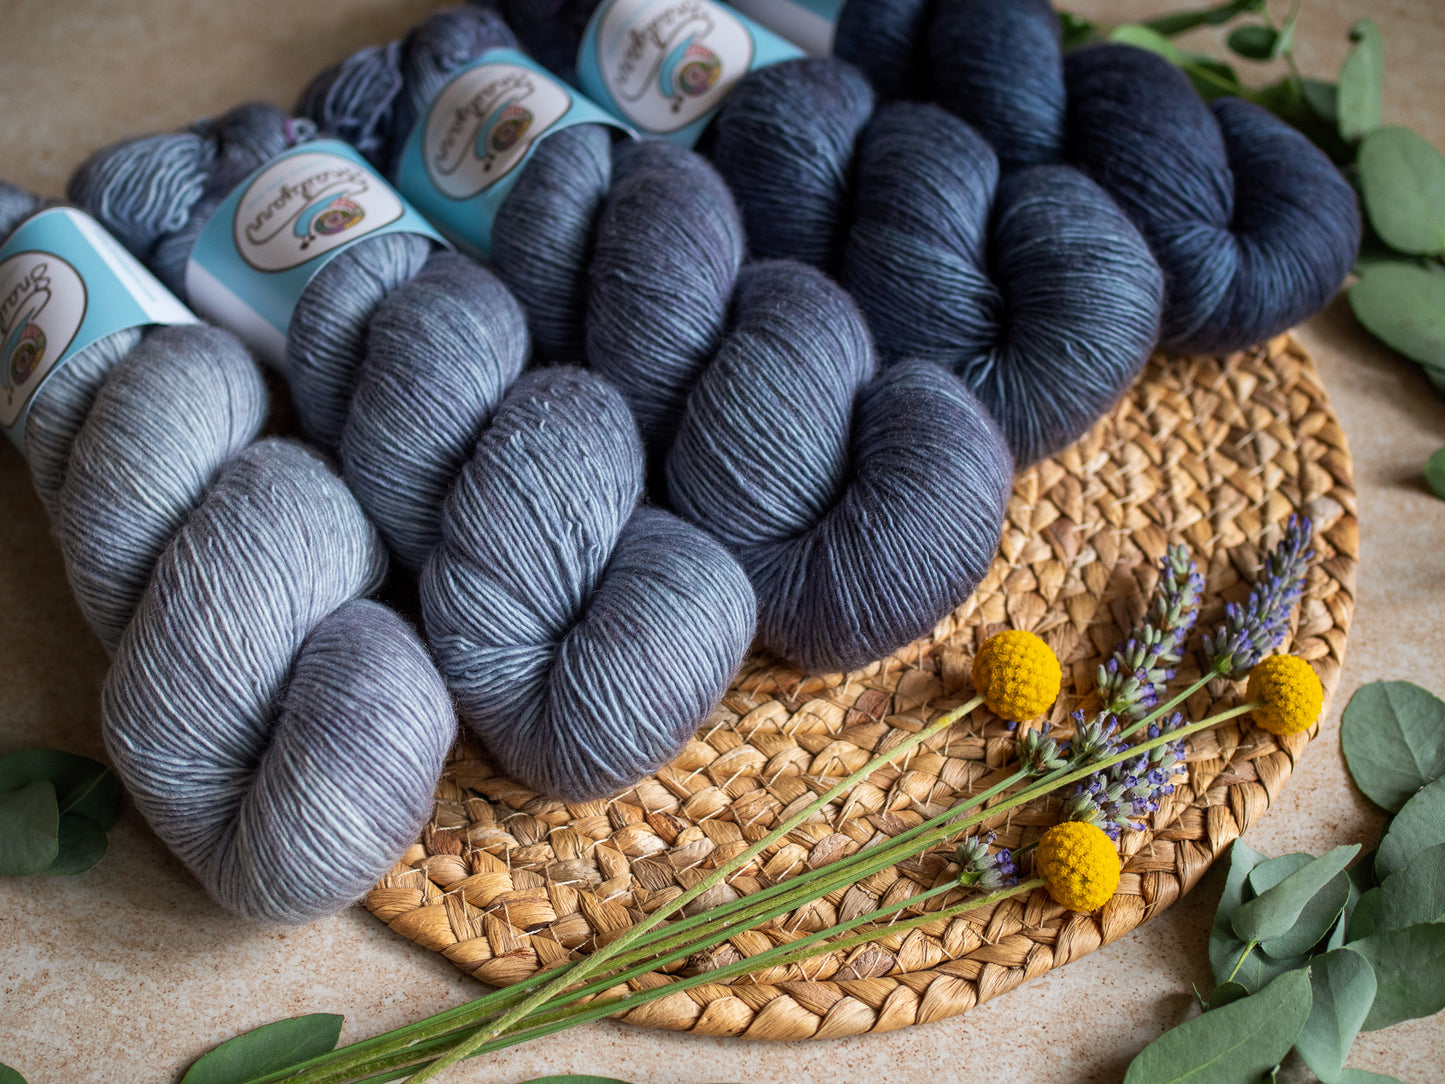 Ardesia fade - The Gradient collection - 5x100gr skeins